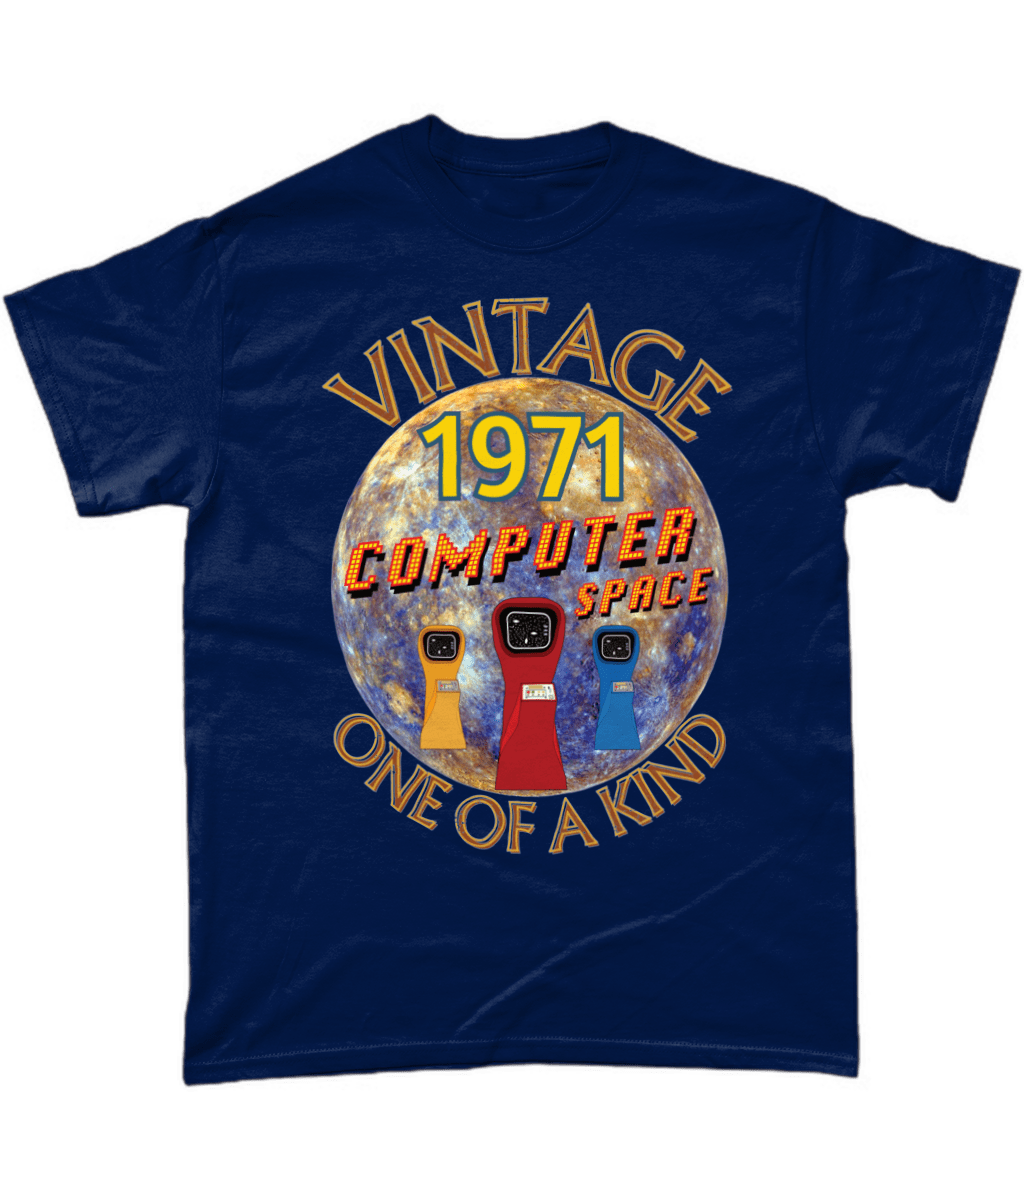 Navy T-Shirt with the words vintage,1971,computer space,one of a kind,large earth, 3 computer space arcade machines